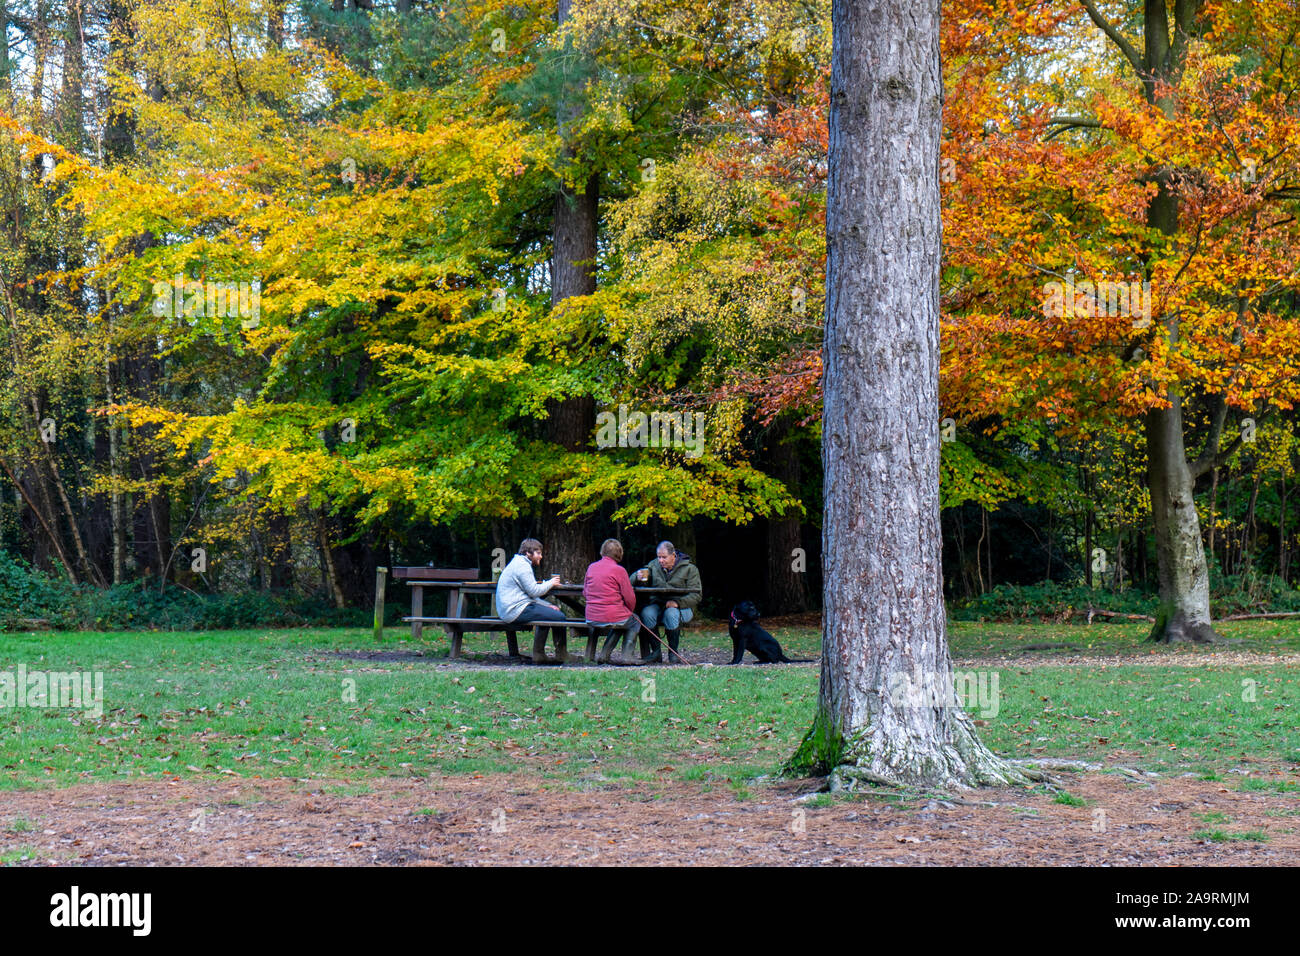 A family and their dog sitting together on a picnic bench in a country park in autumn or fall, Forest of Bere, Wickham, Hampshire, UK Stock Photo